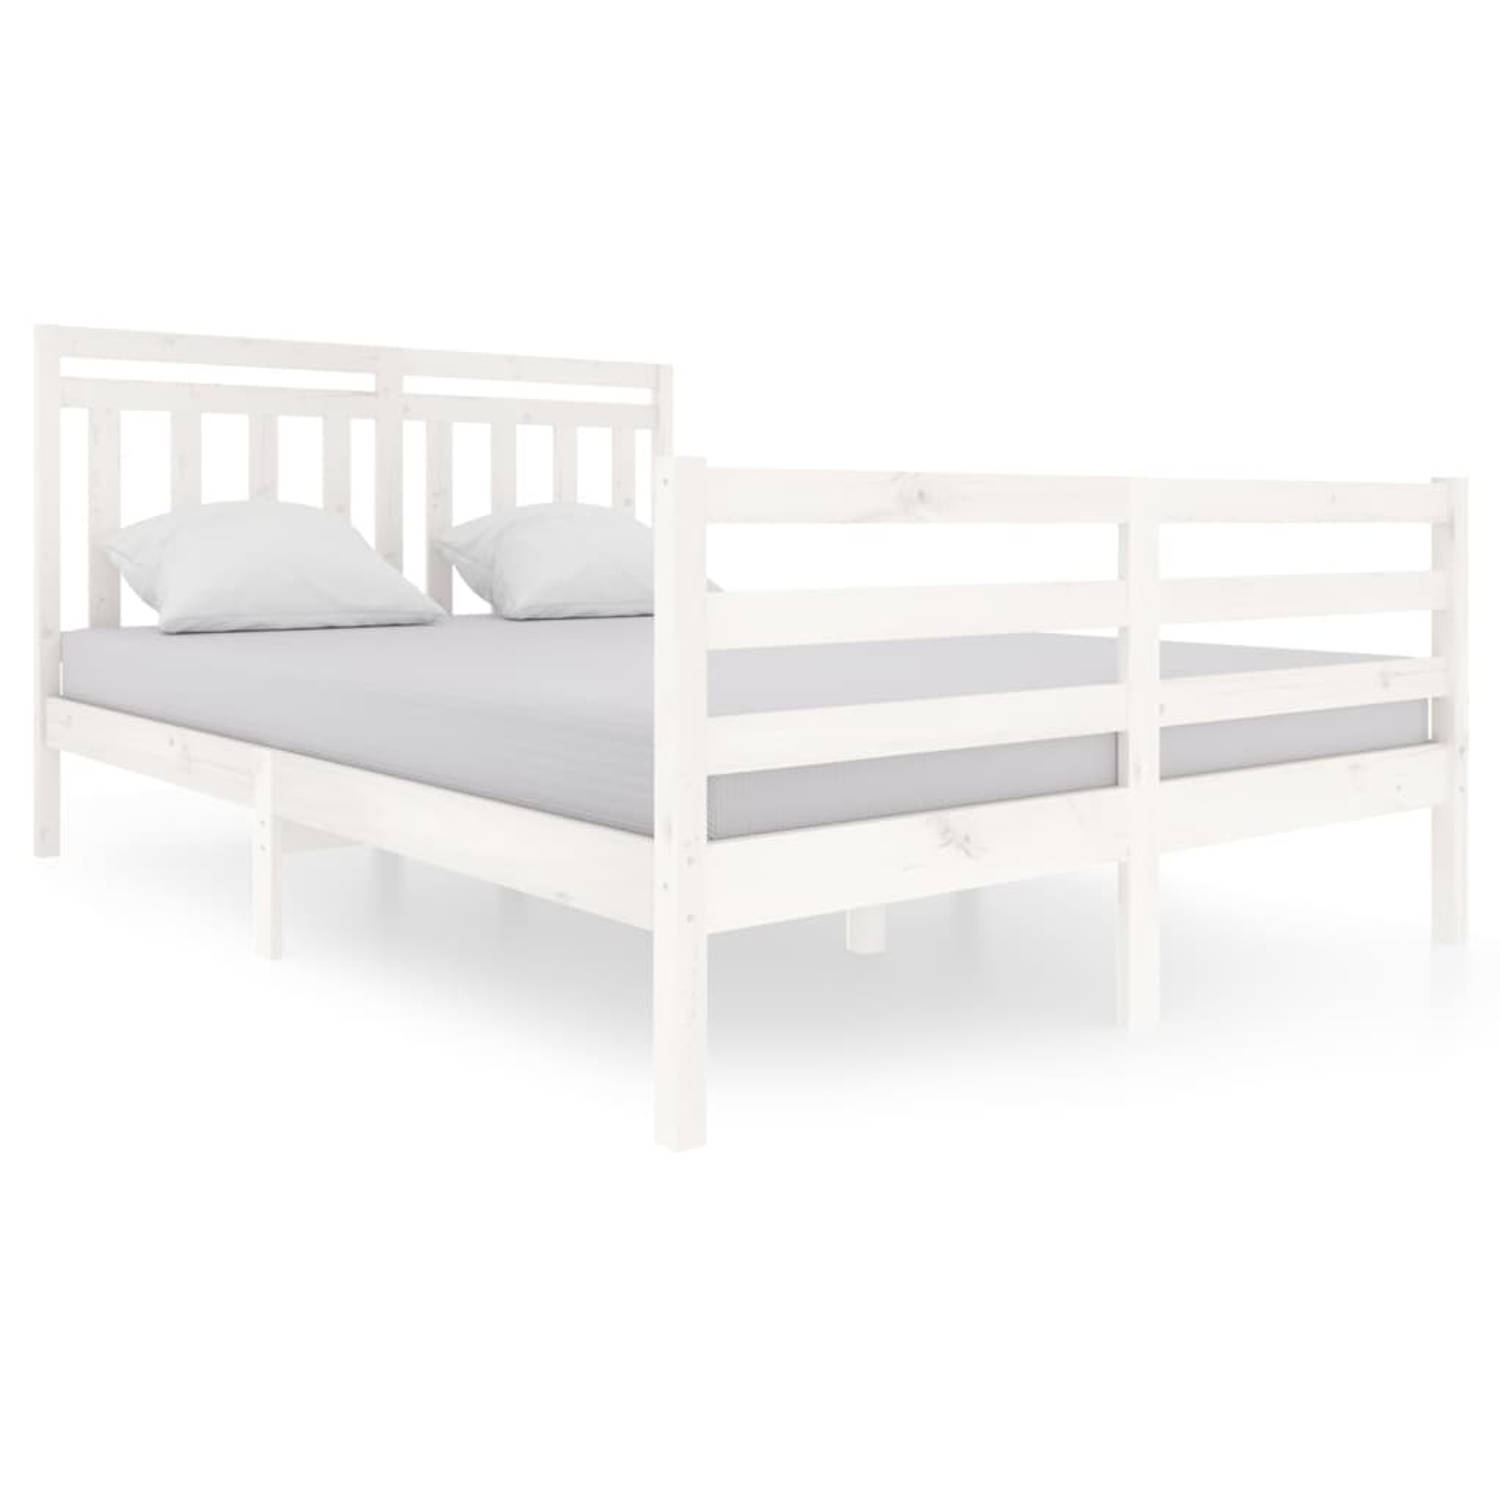 The Living Store Bedframe massief hout wit 140x200 cm - Bedframe - Bedframes - Tweepersoonsbed - Bed - Bedombouw - Dubbel Bed - Frame - Bed Frame - Ledikant - Bedframe Met Hoofdein